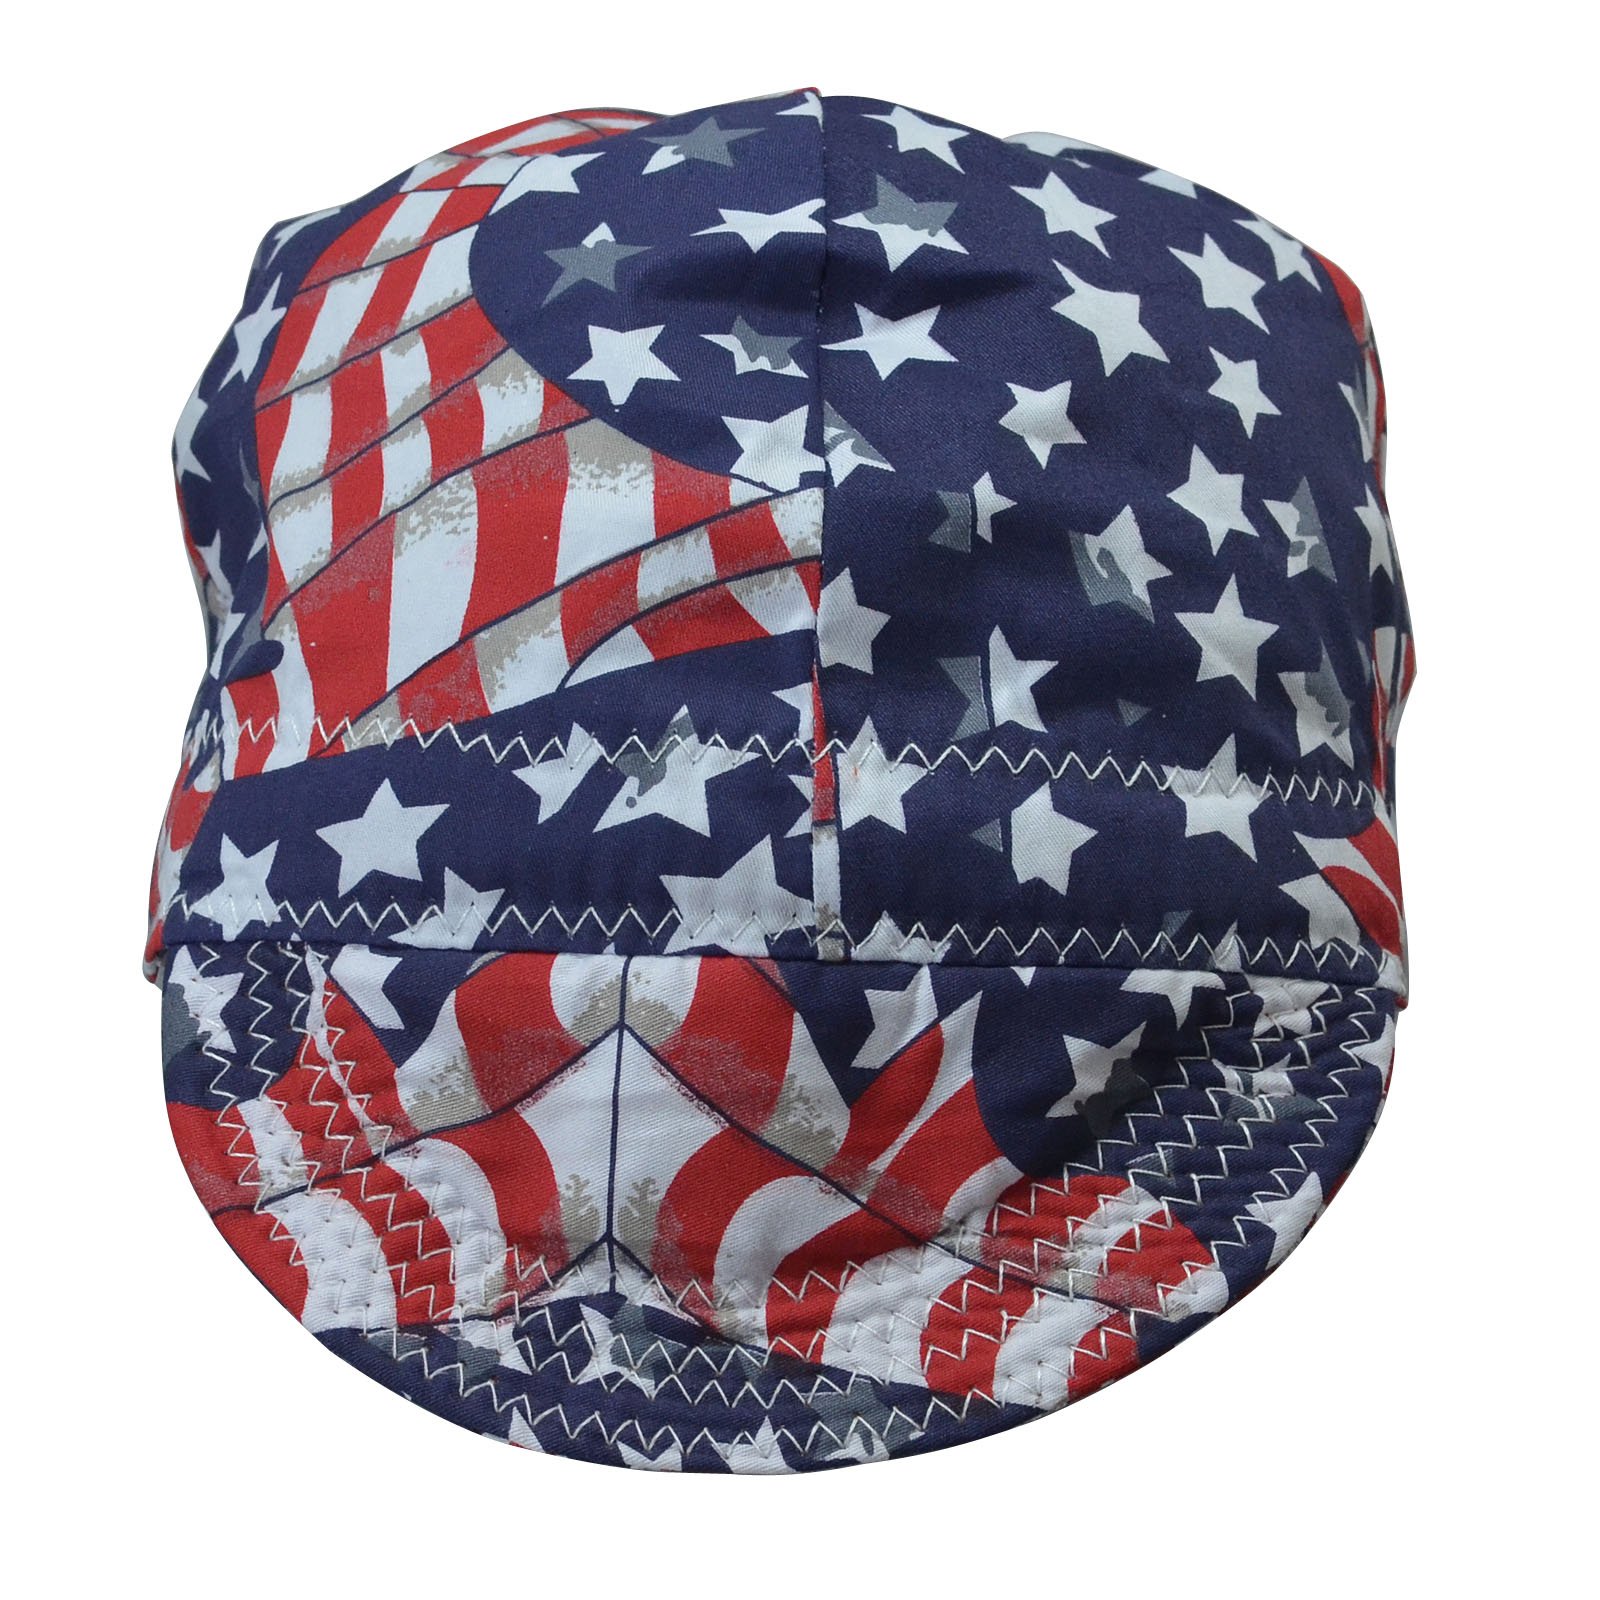 Perimeter 24 inch Fashion Style Welding Caps of Colorful Flag for Welders